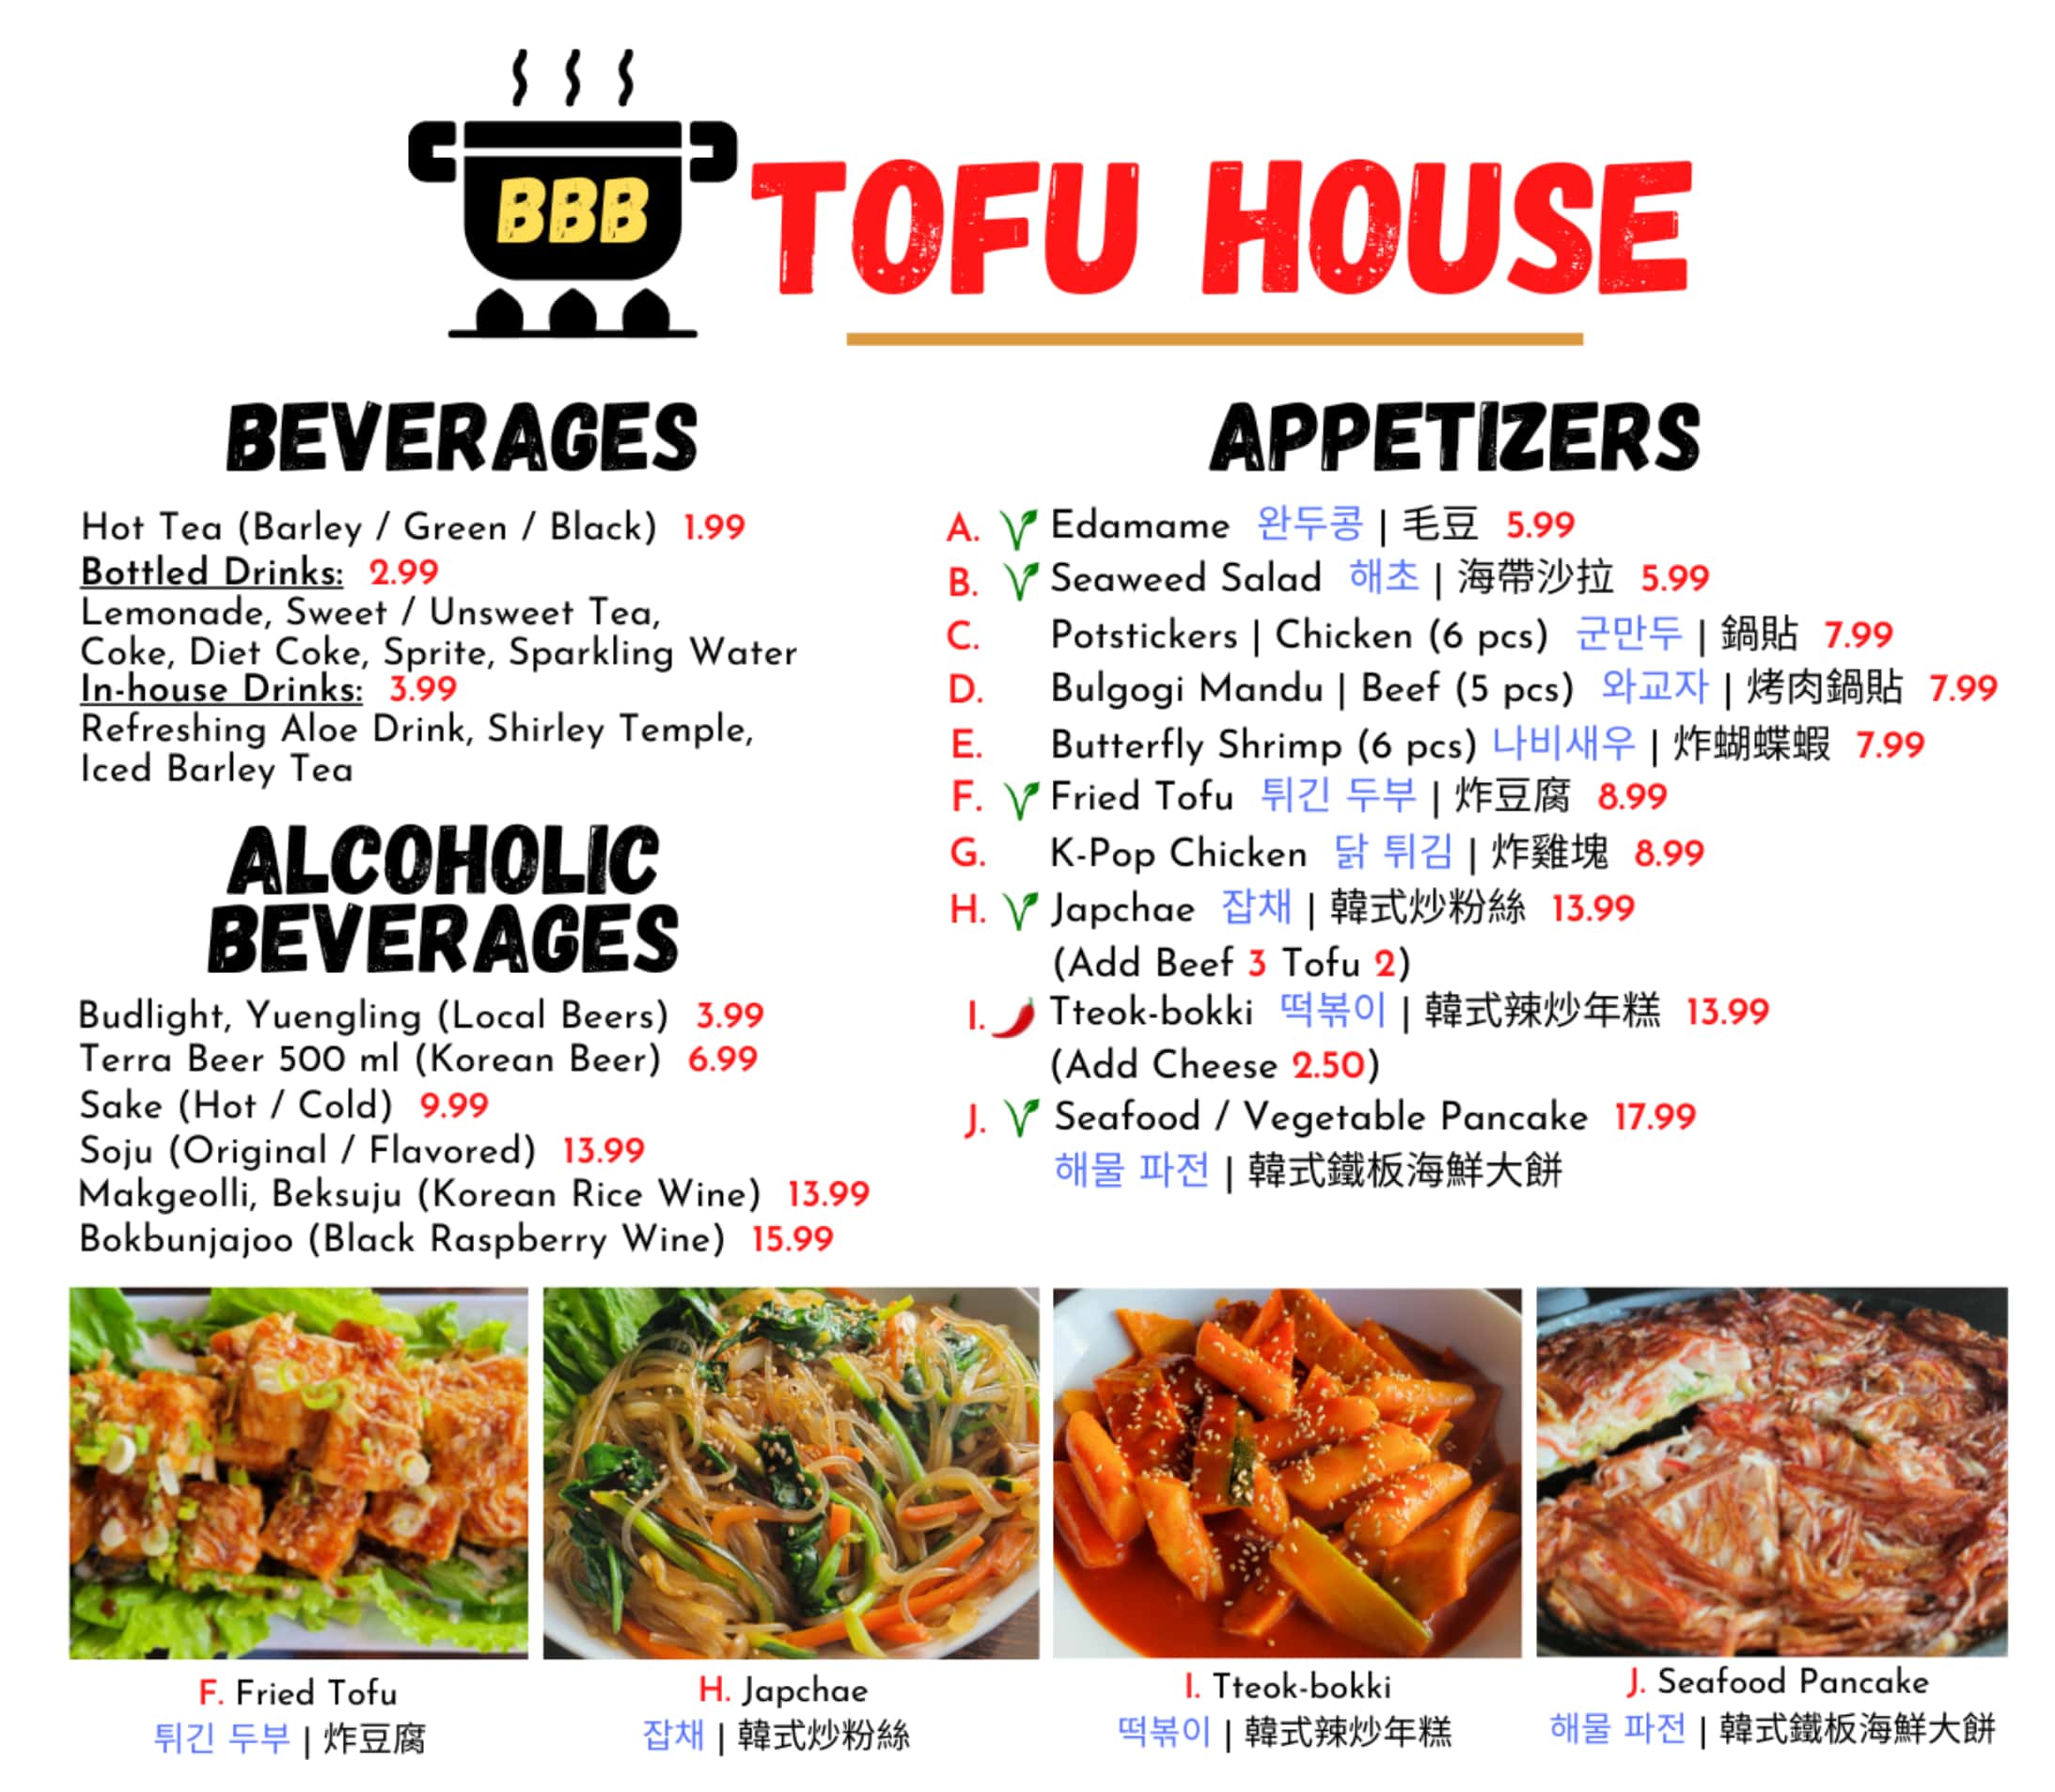 BBB Tofu House Orlando Drinks and Appetizers Menu